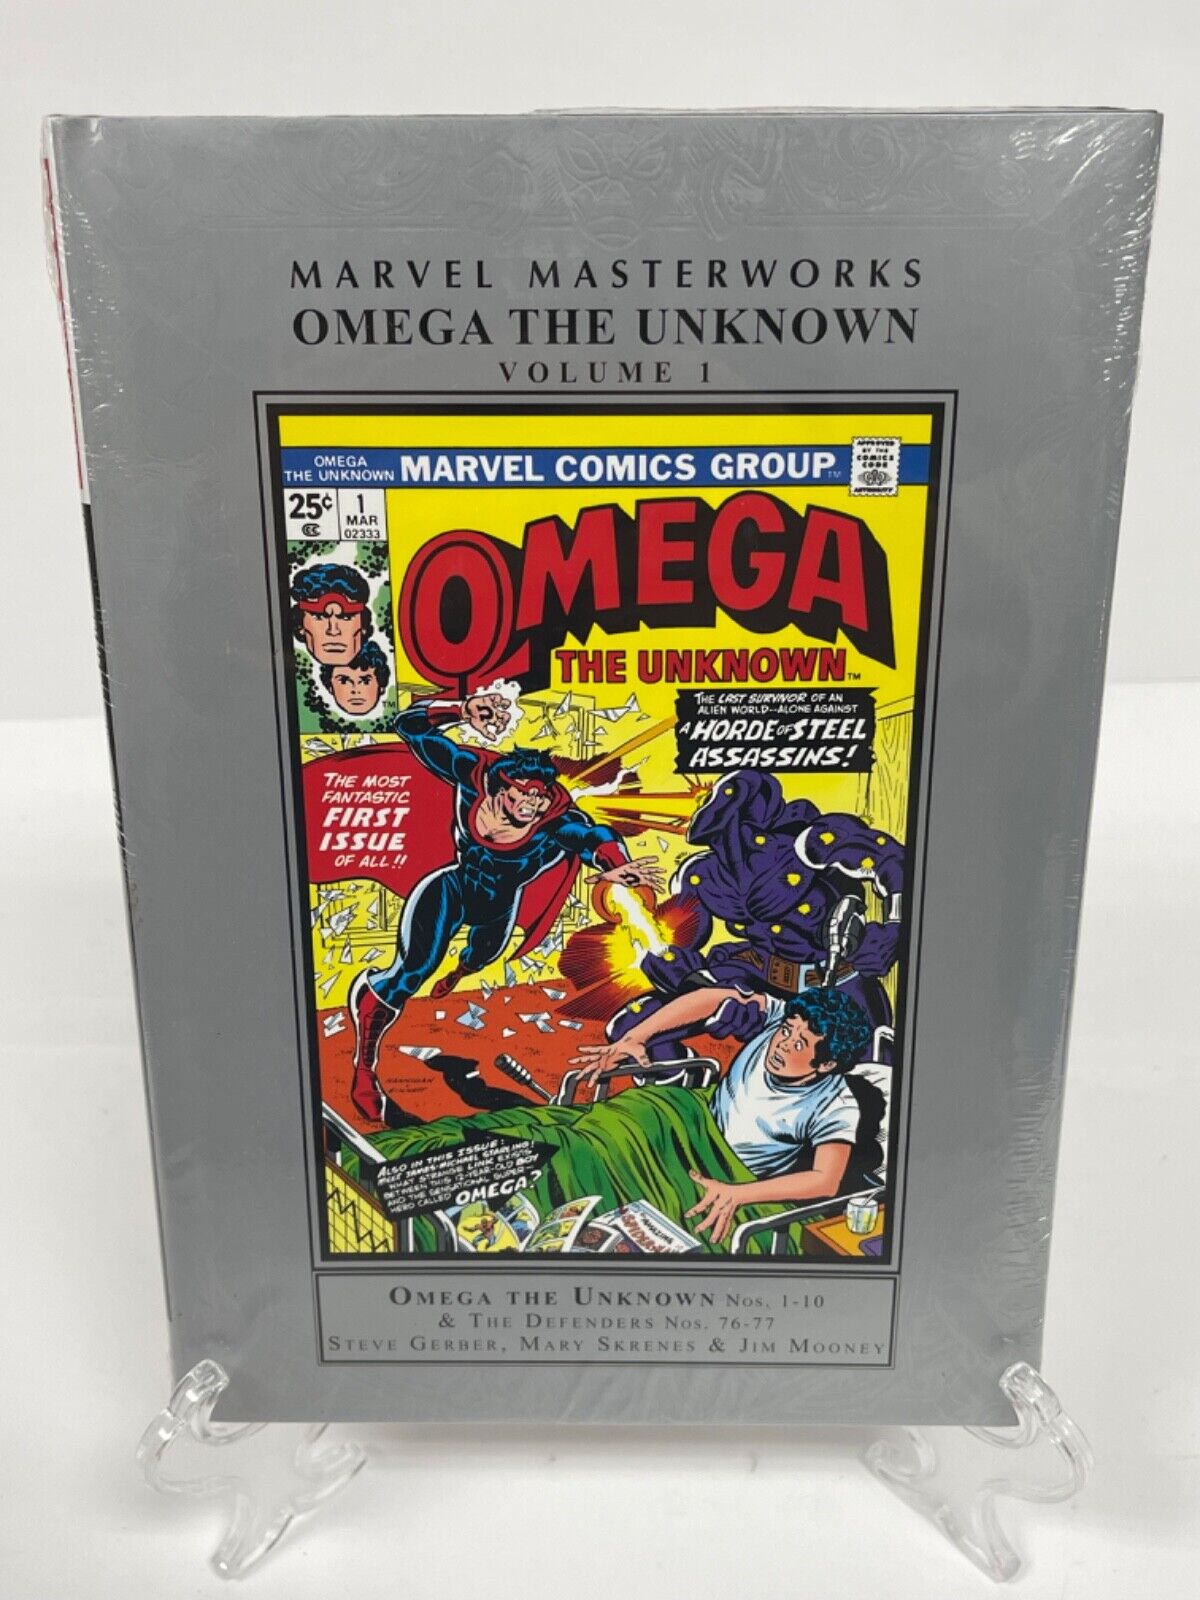 Omega The Unknown Vol 1 Marvel Masterworks REGULAR COVER New HC Hardcover